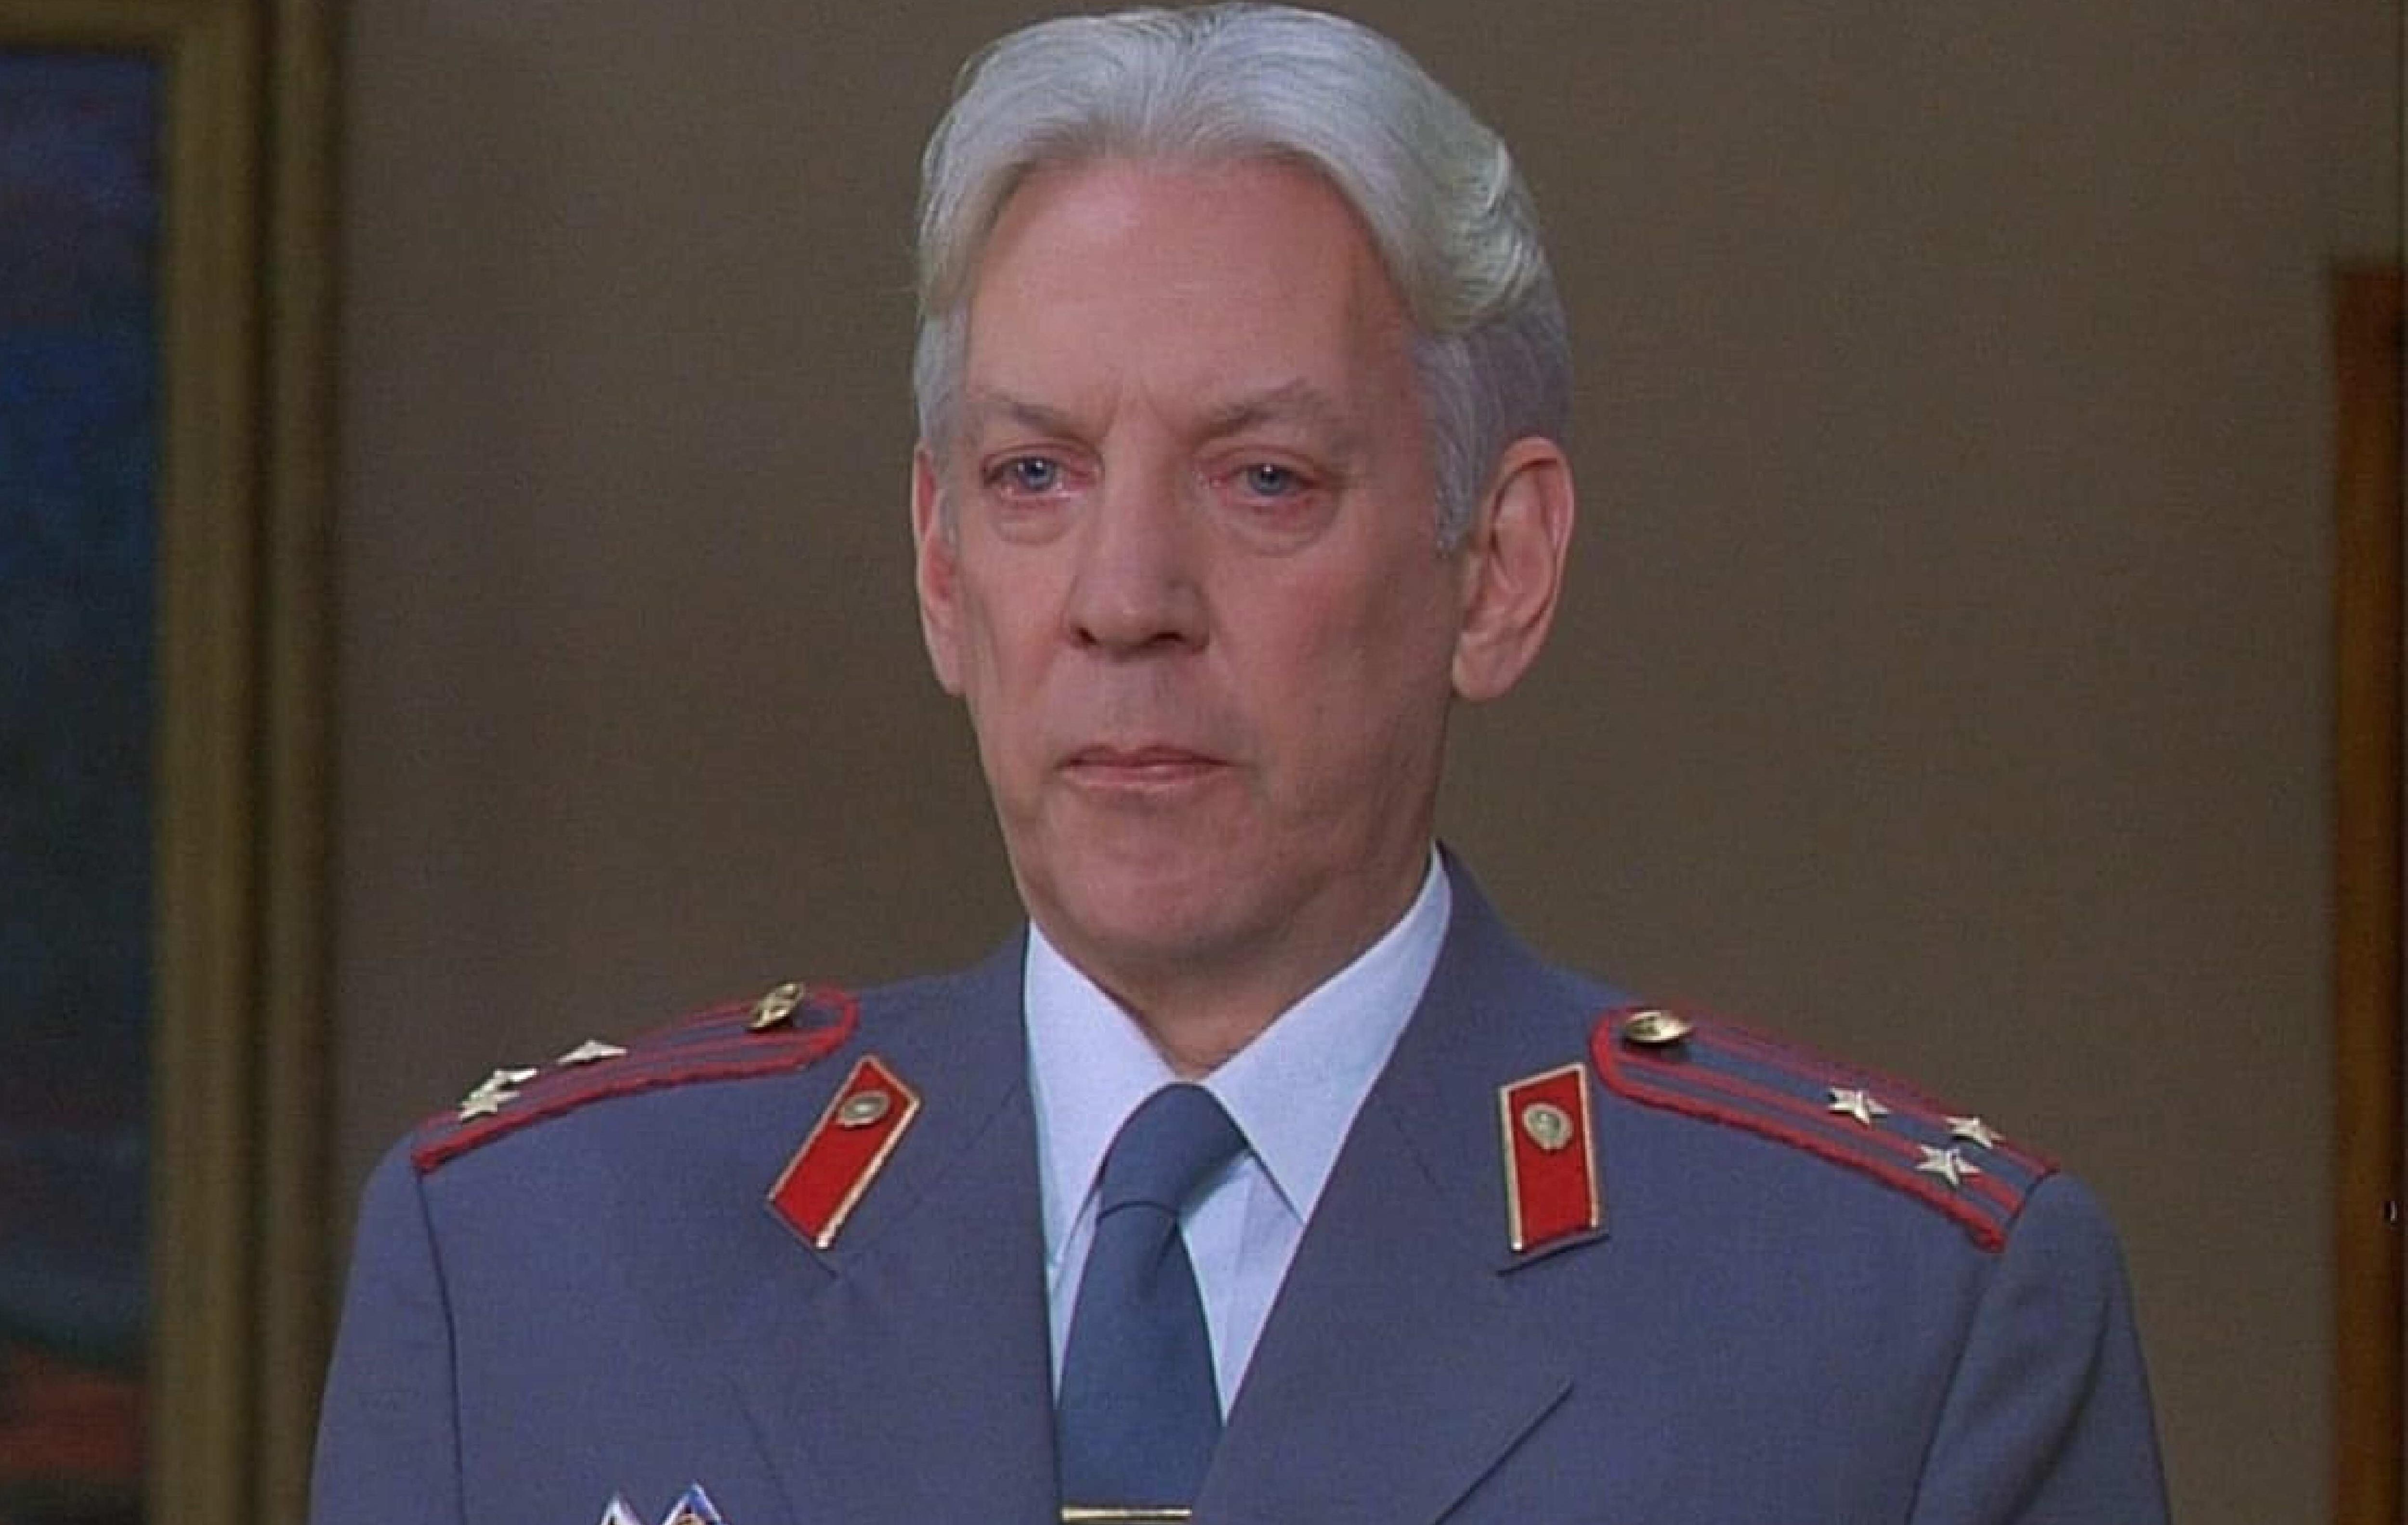 Donald Sutherland in a blue and red commander type uniform in the film Citizen X